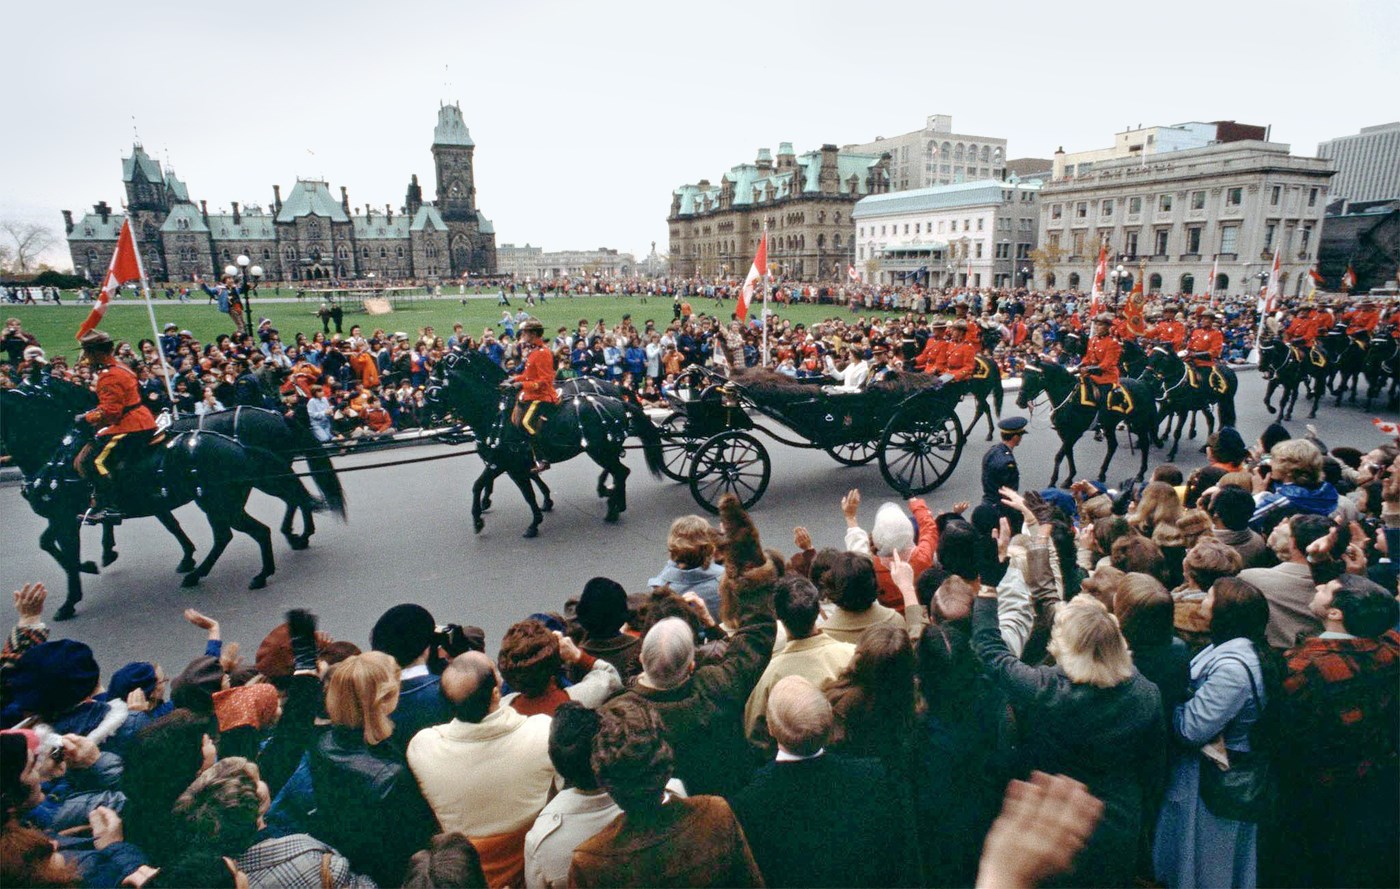 Queen Elizabeth and Prince Philip wave to crowds on Parliament Hill as they ride in an open carriage, escorted by RCMP officers, during the Queen’s Silver Jubilee visit to Canada in 1977. The Queen later opened Parliament with the reading of the Speech from the Throne from the Senate Chamber. (Photo credit: The Canadian Press)